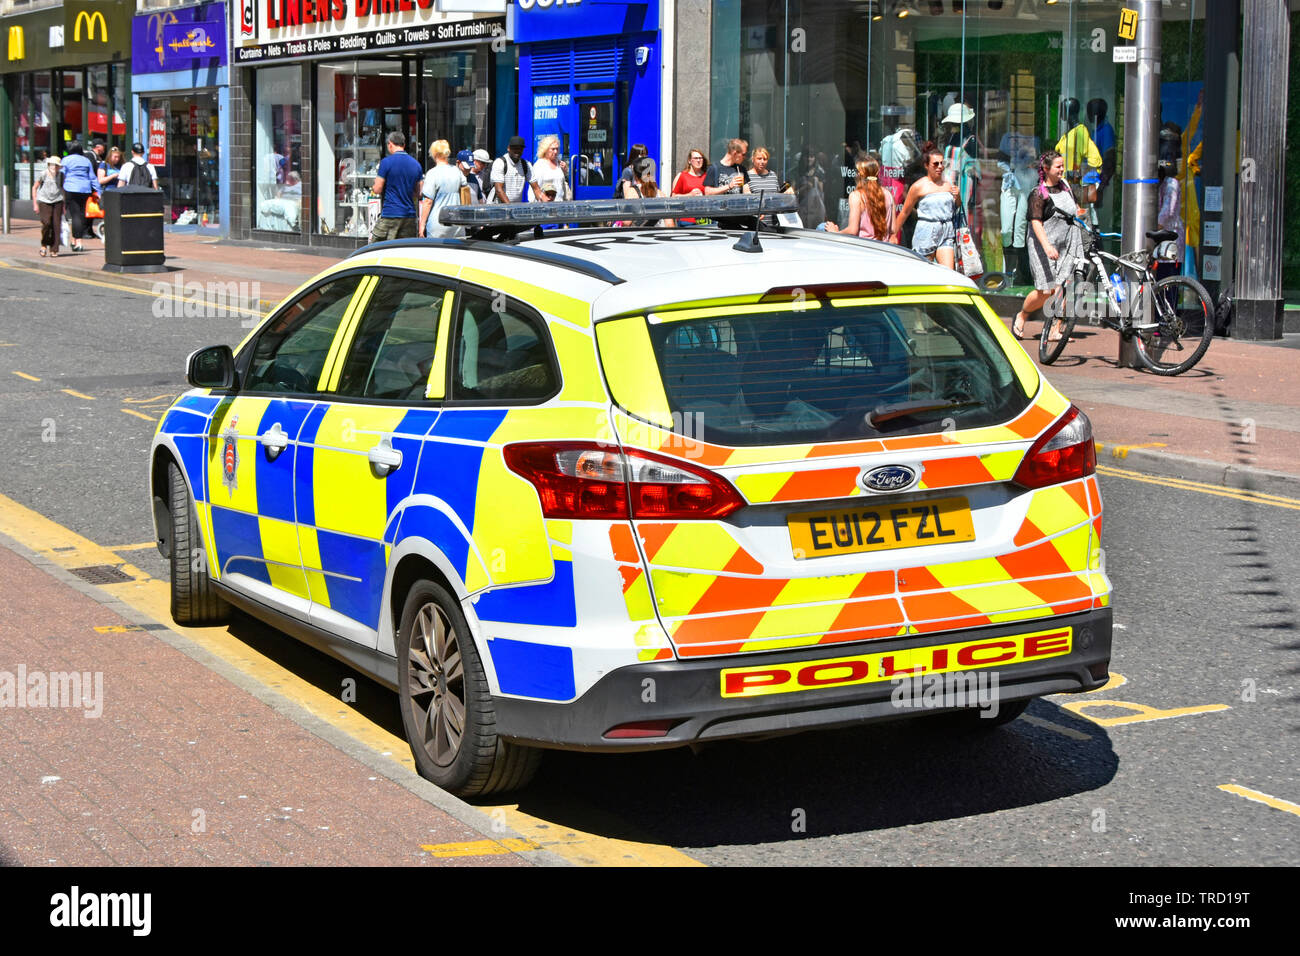 Shoppers in busy high street Essex police force patrol car high visibility markings in town centre shopping area in Southend on Sea  Essex England UK Stock Photo